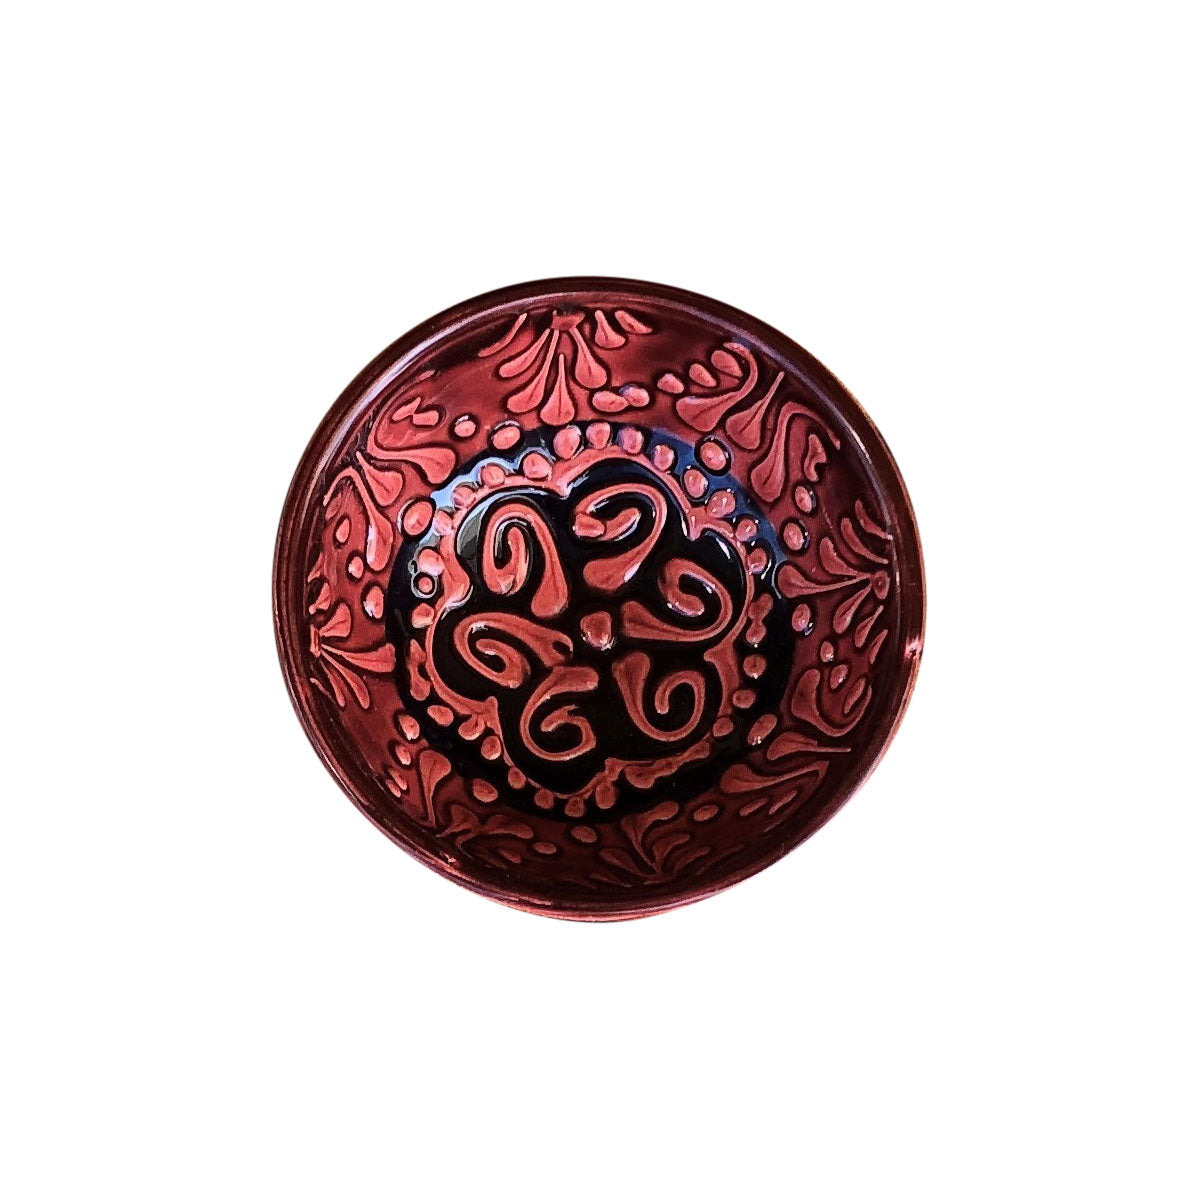 A small red and black handmade Turkish bowl with a patterned design.